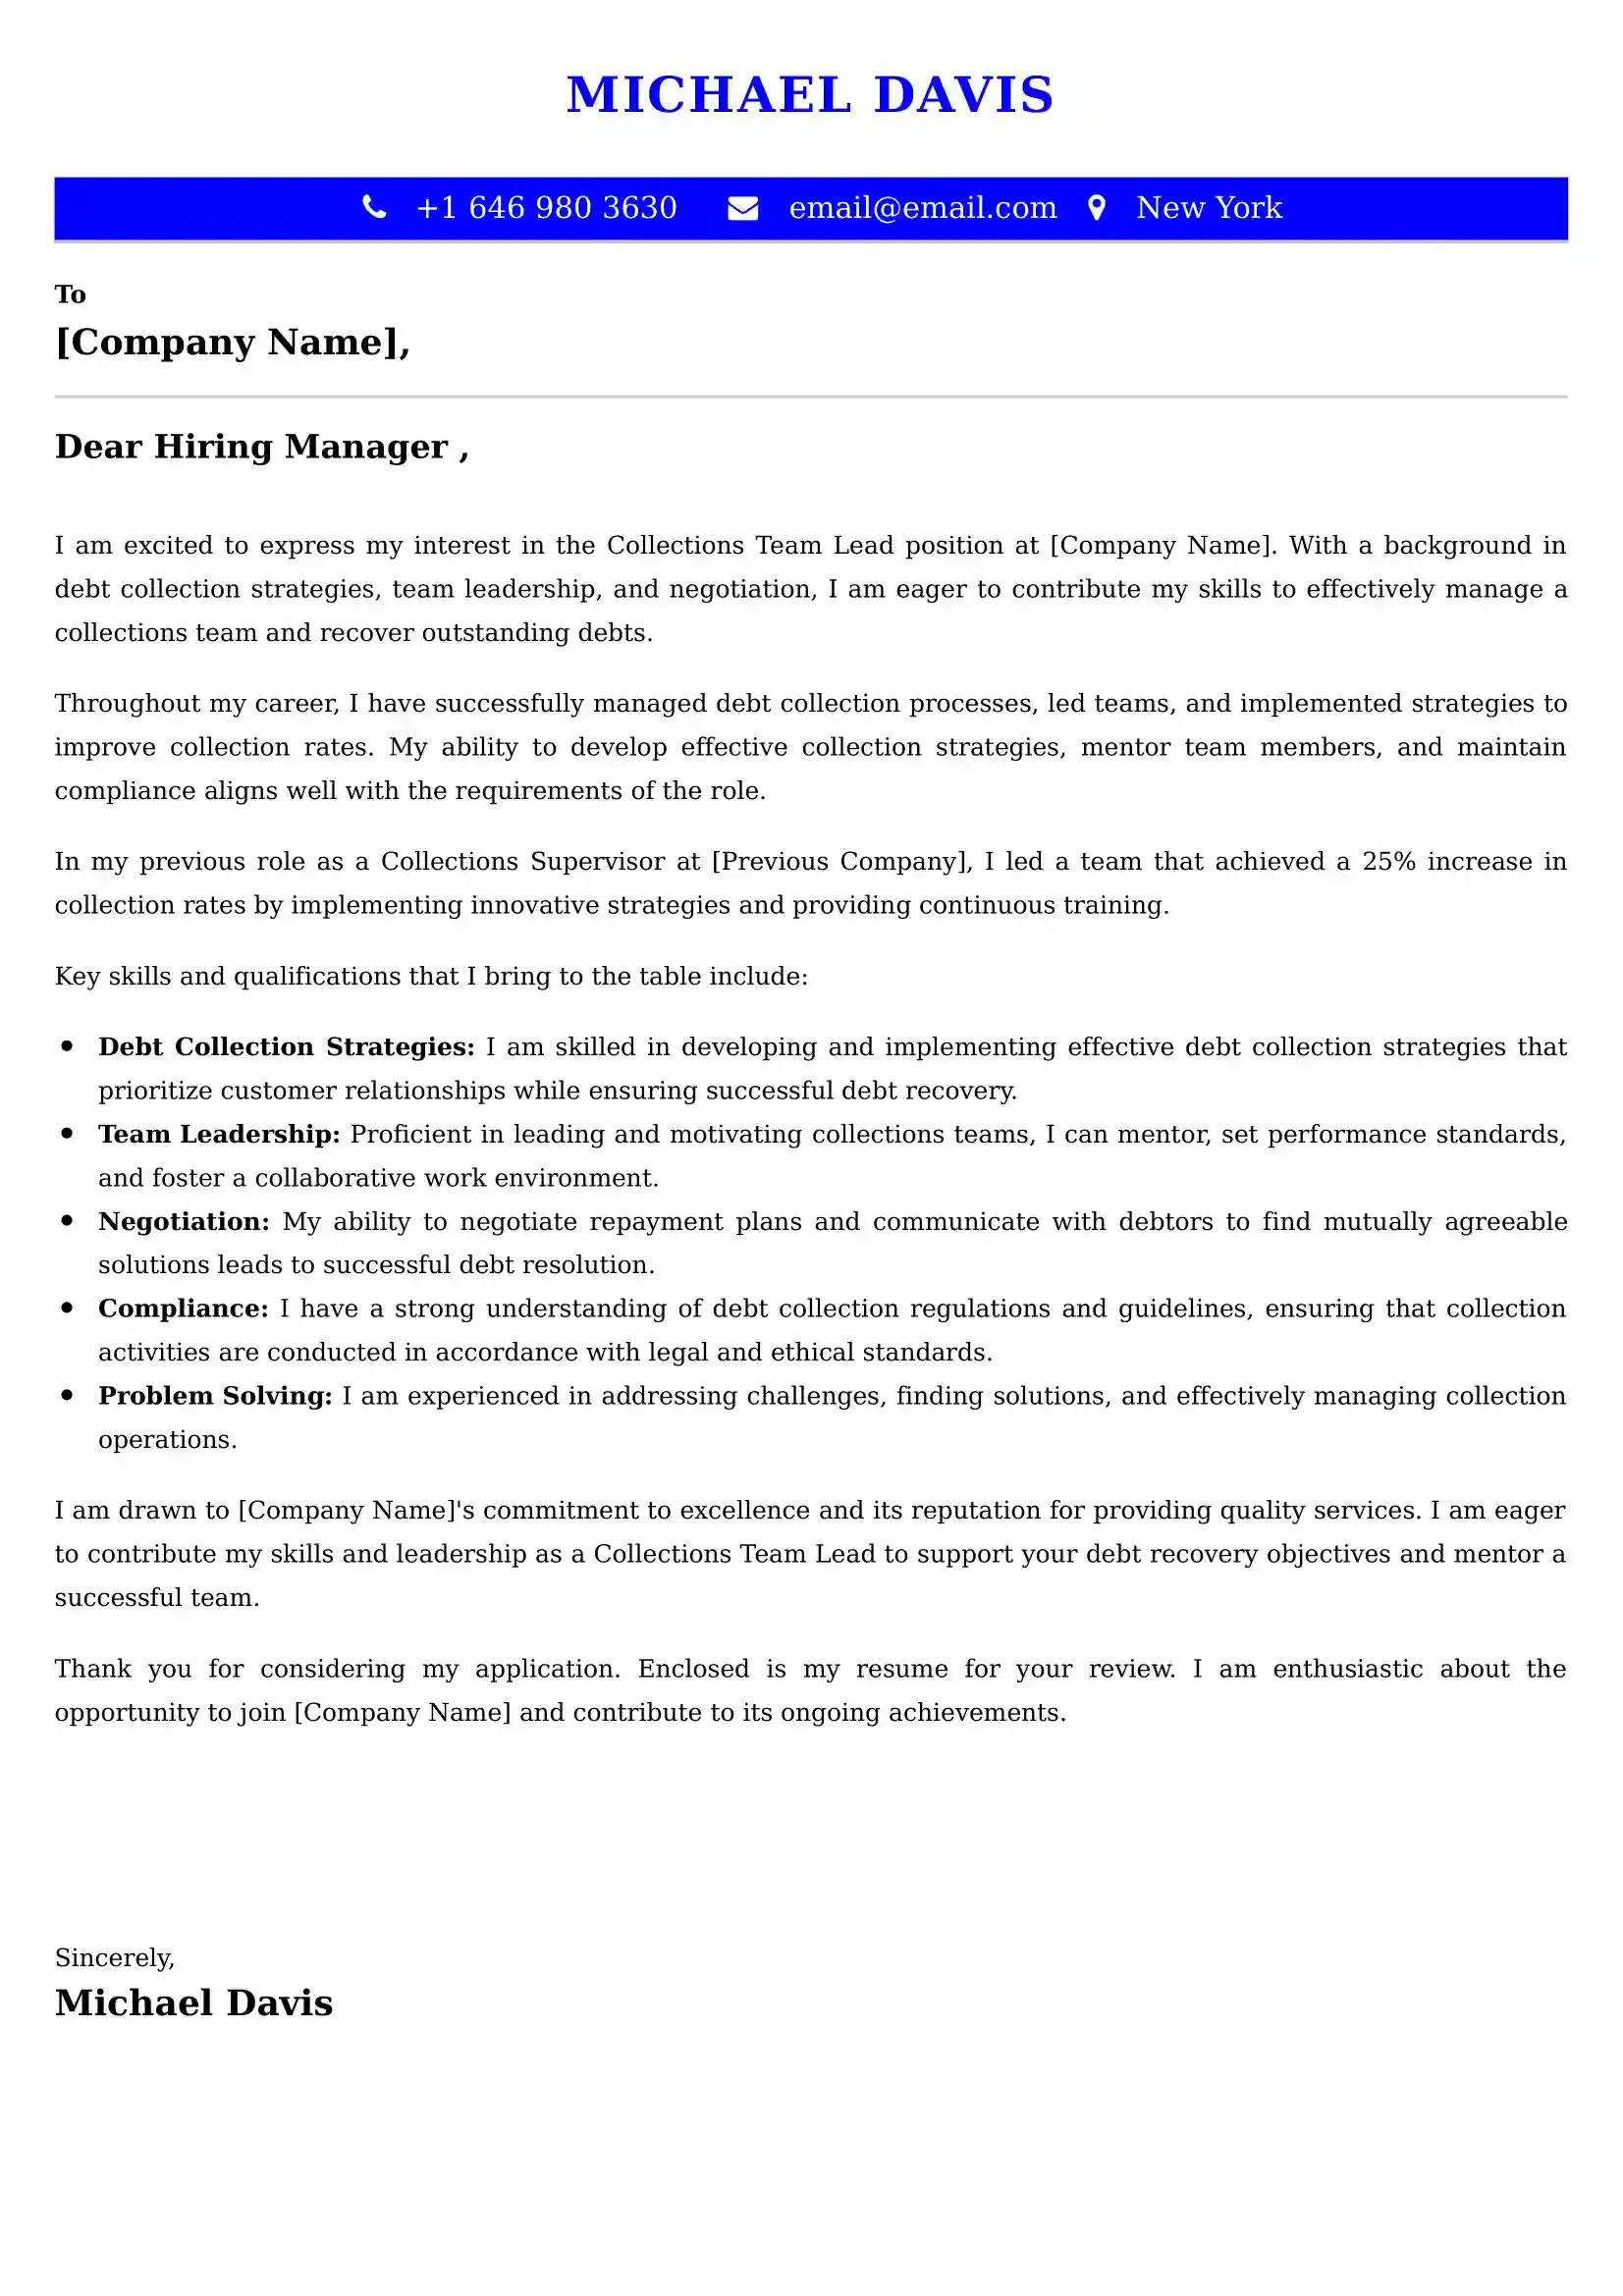 Collections Team Lead Cover Letter Examples India